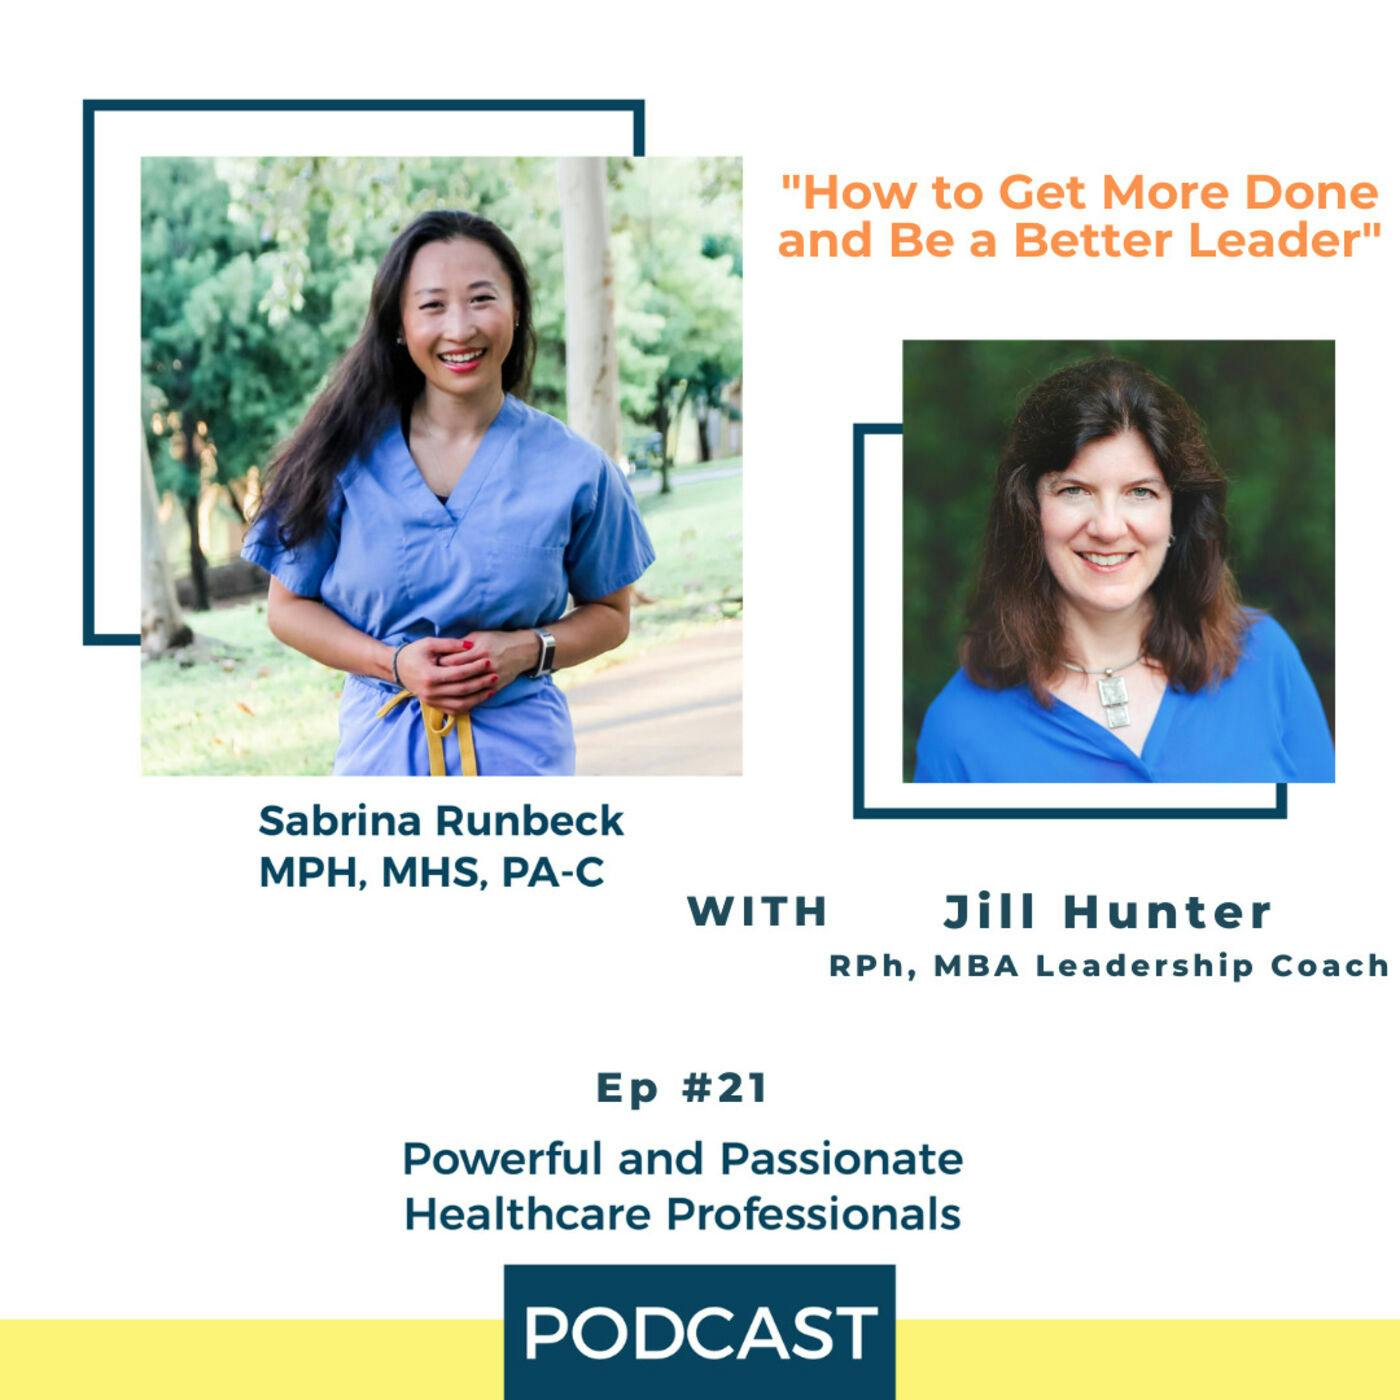 Ep 21 – How to Get More Done and Be a Better Leader with by Jill Hunter, RPh, MBA